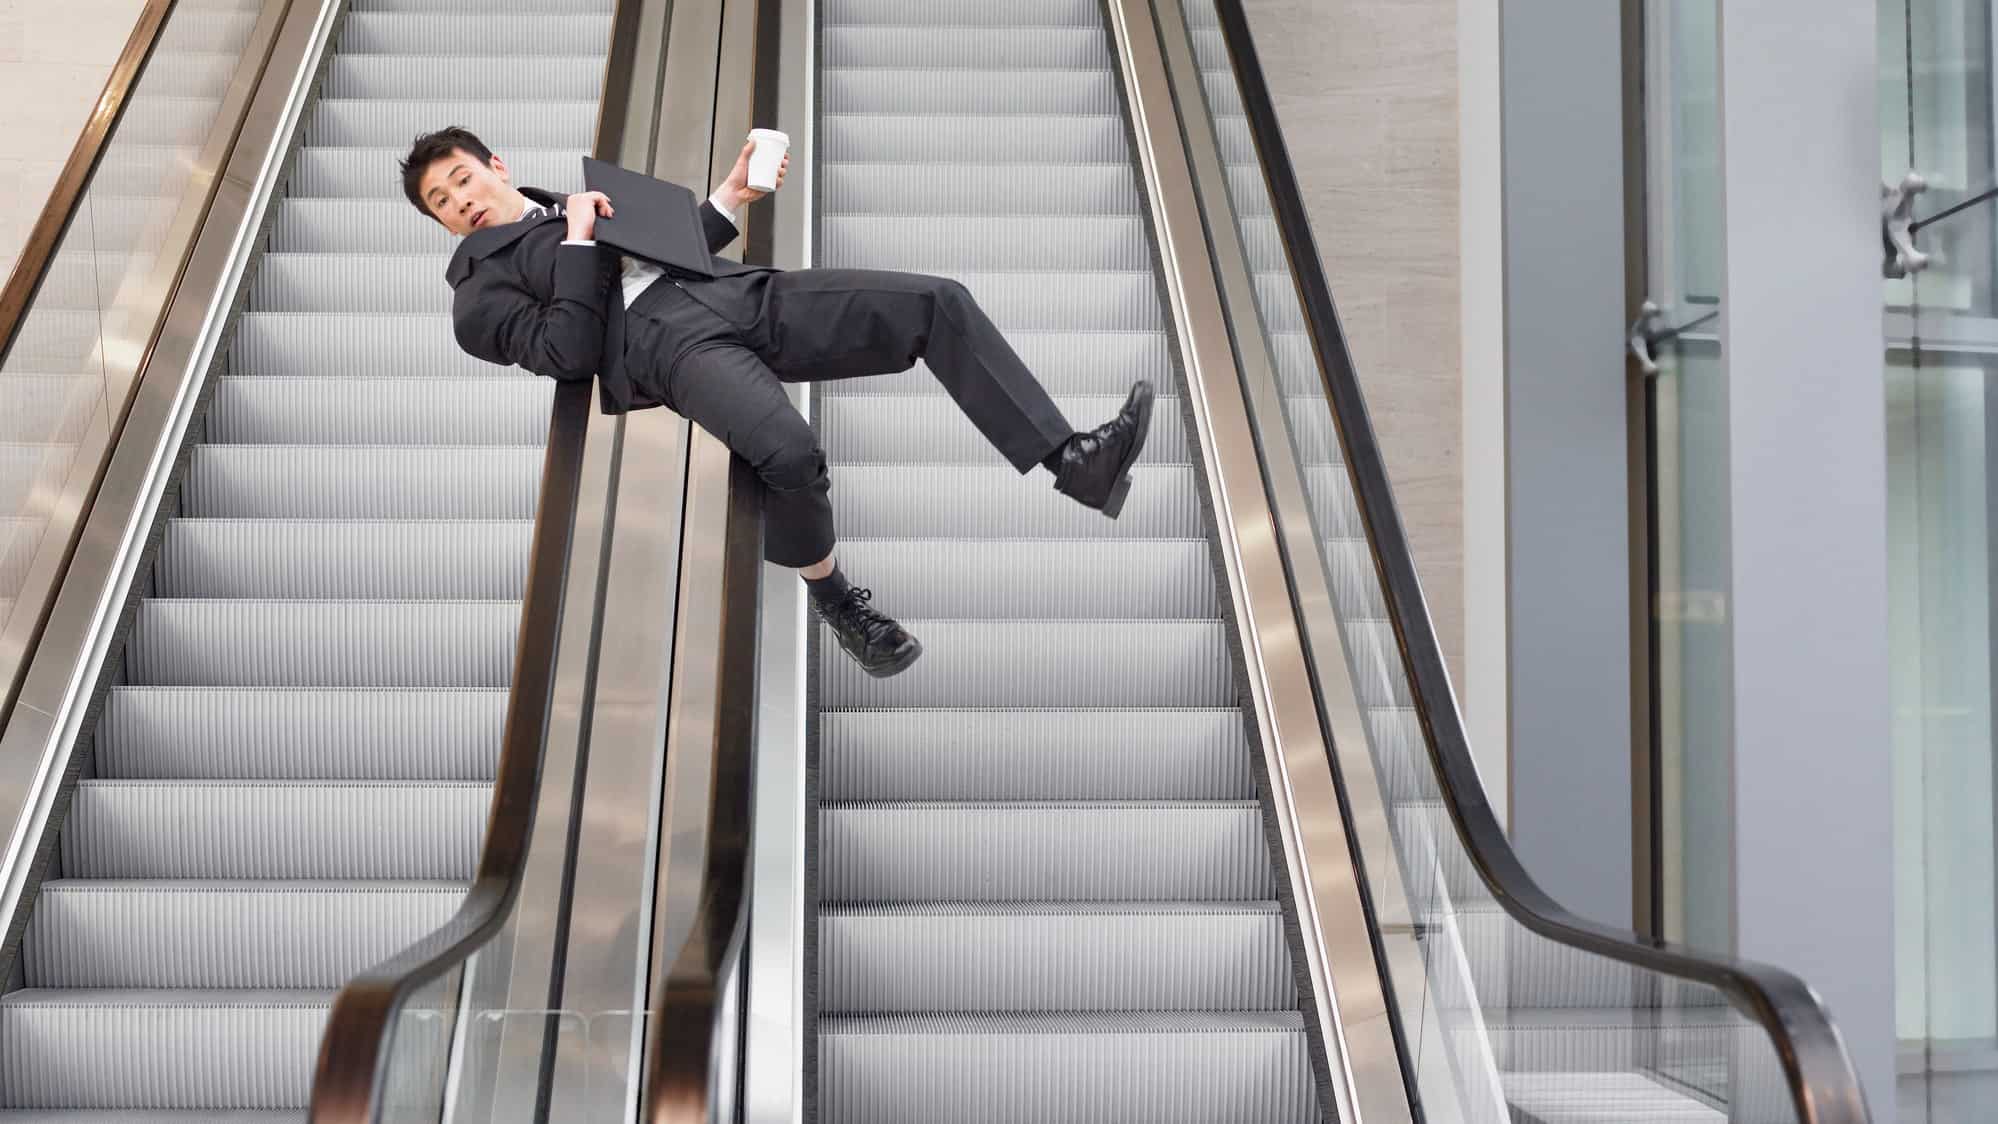 a man in a business suit slides down the handrails of a bank of steel escalators, clutching his documents and telephone.